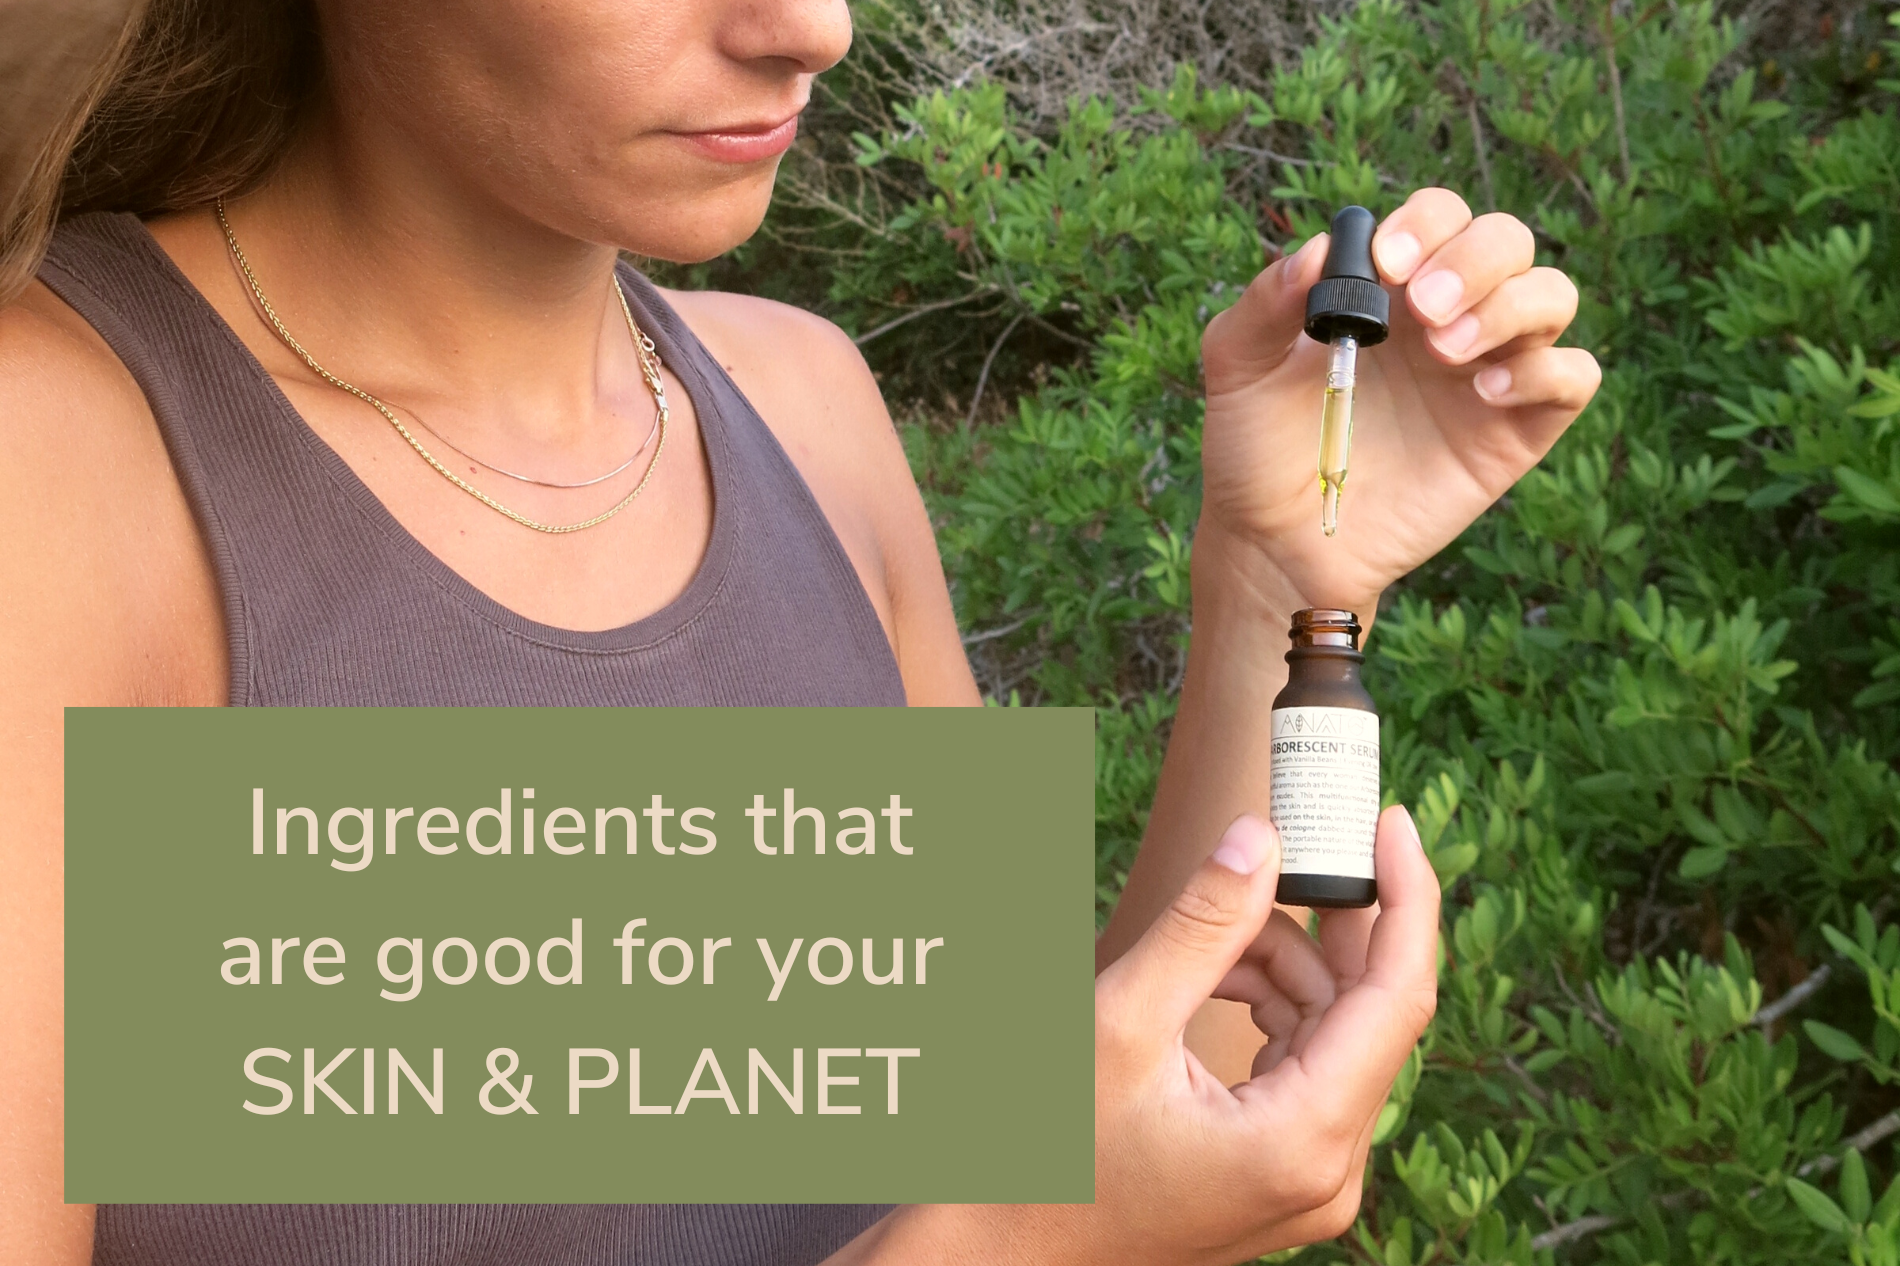 Ingredients that are good for your SKIN & PLANET - Anato Life Skincare